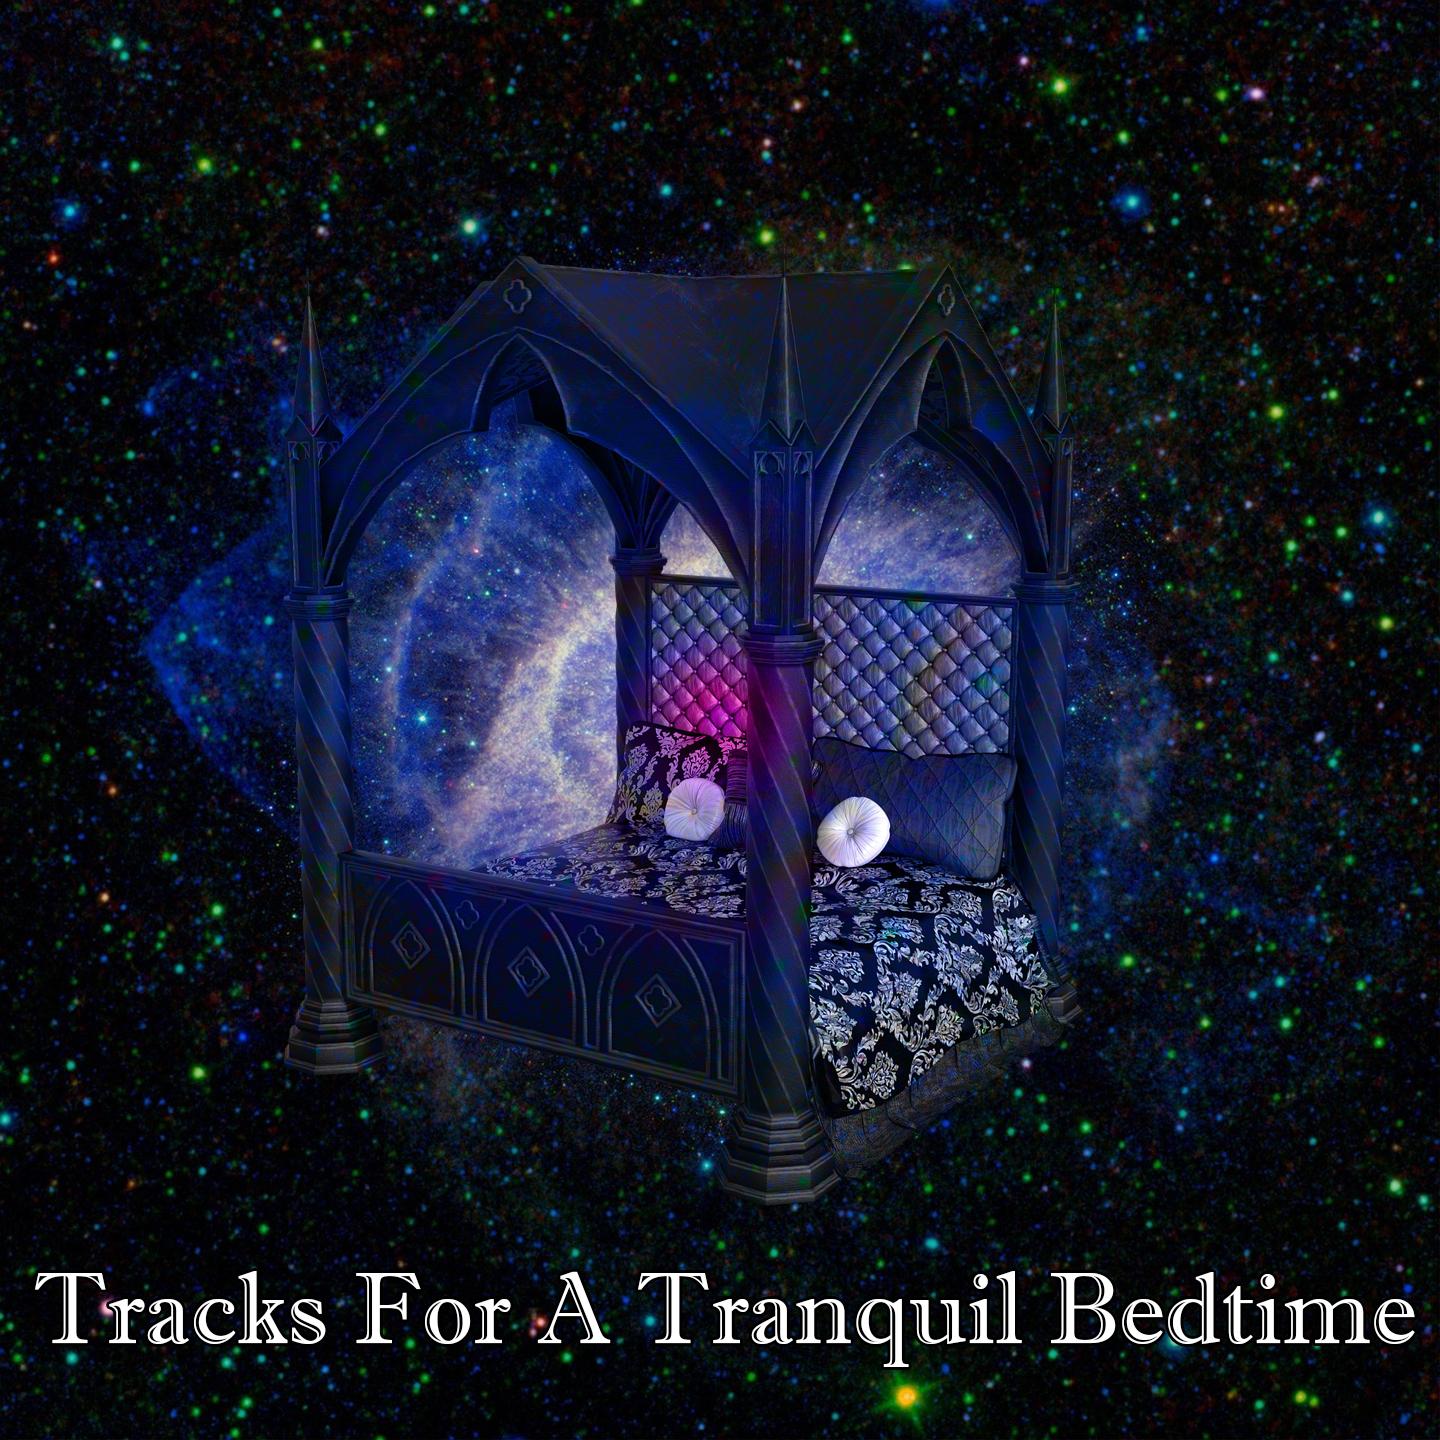 Tracks For A Tranquil Bedtime